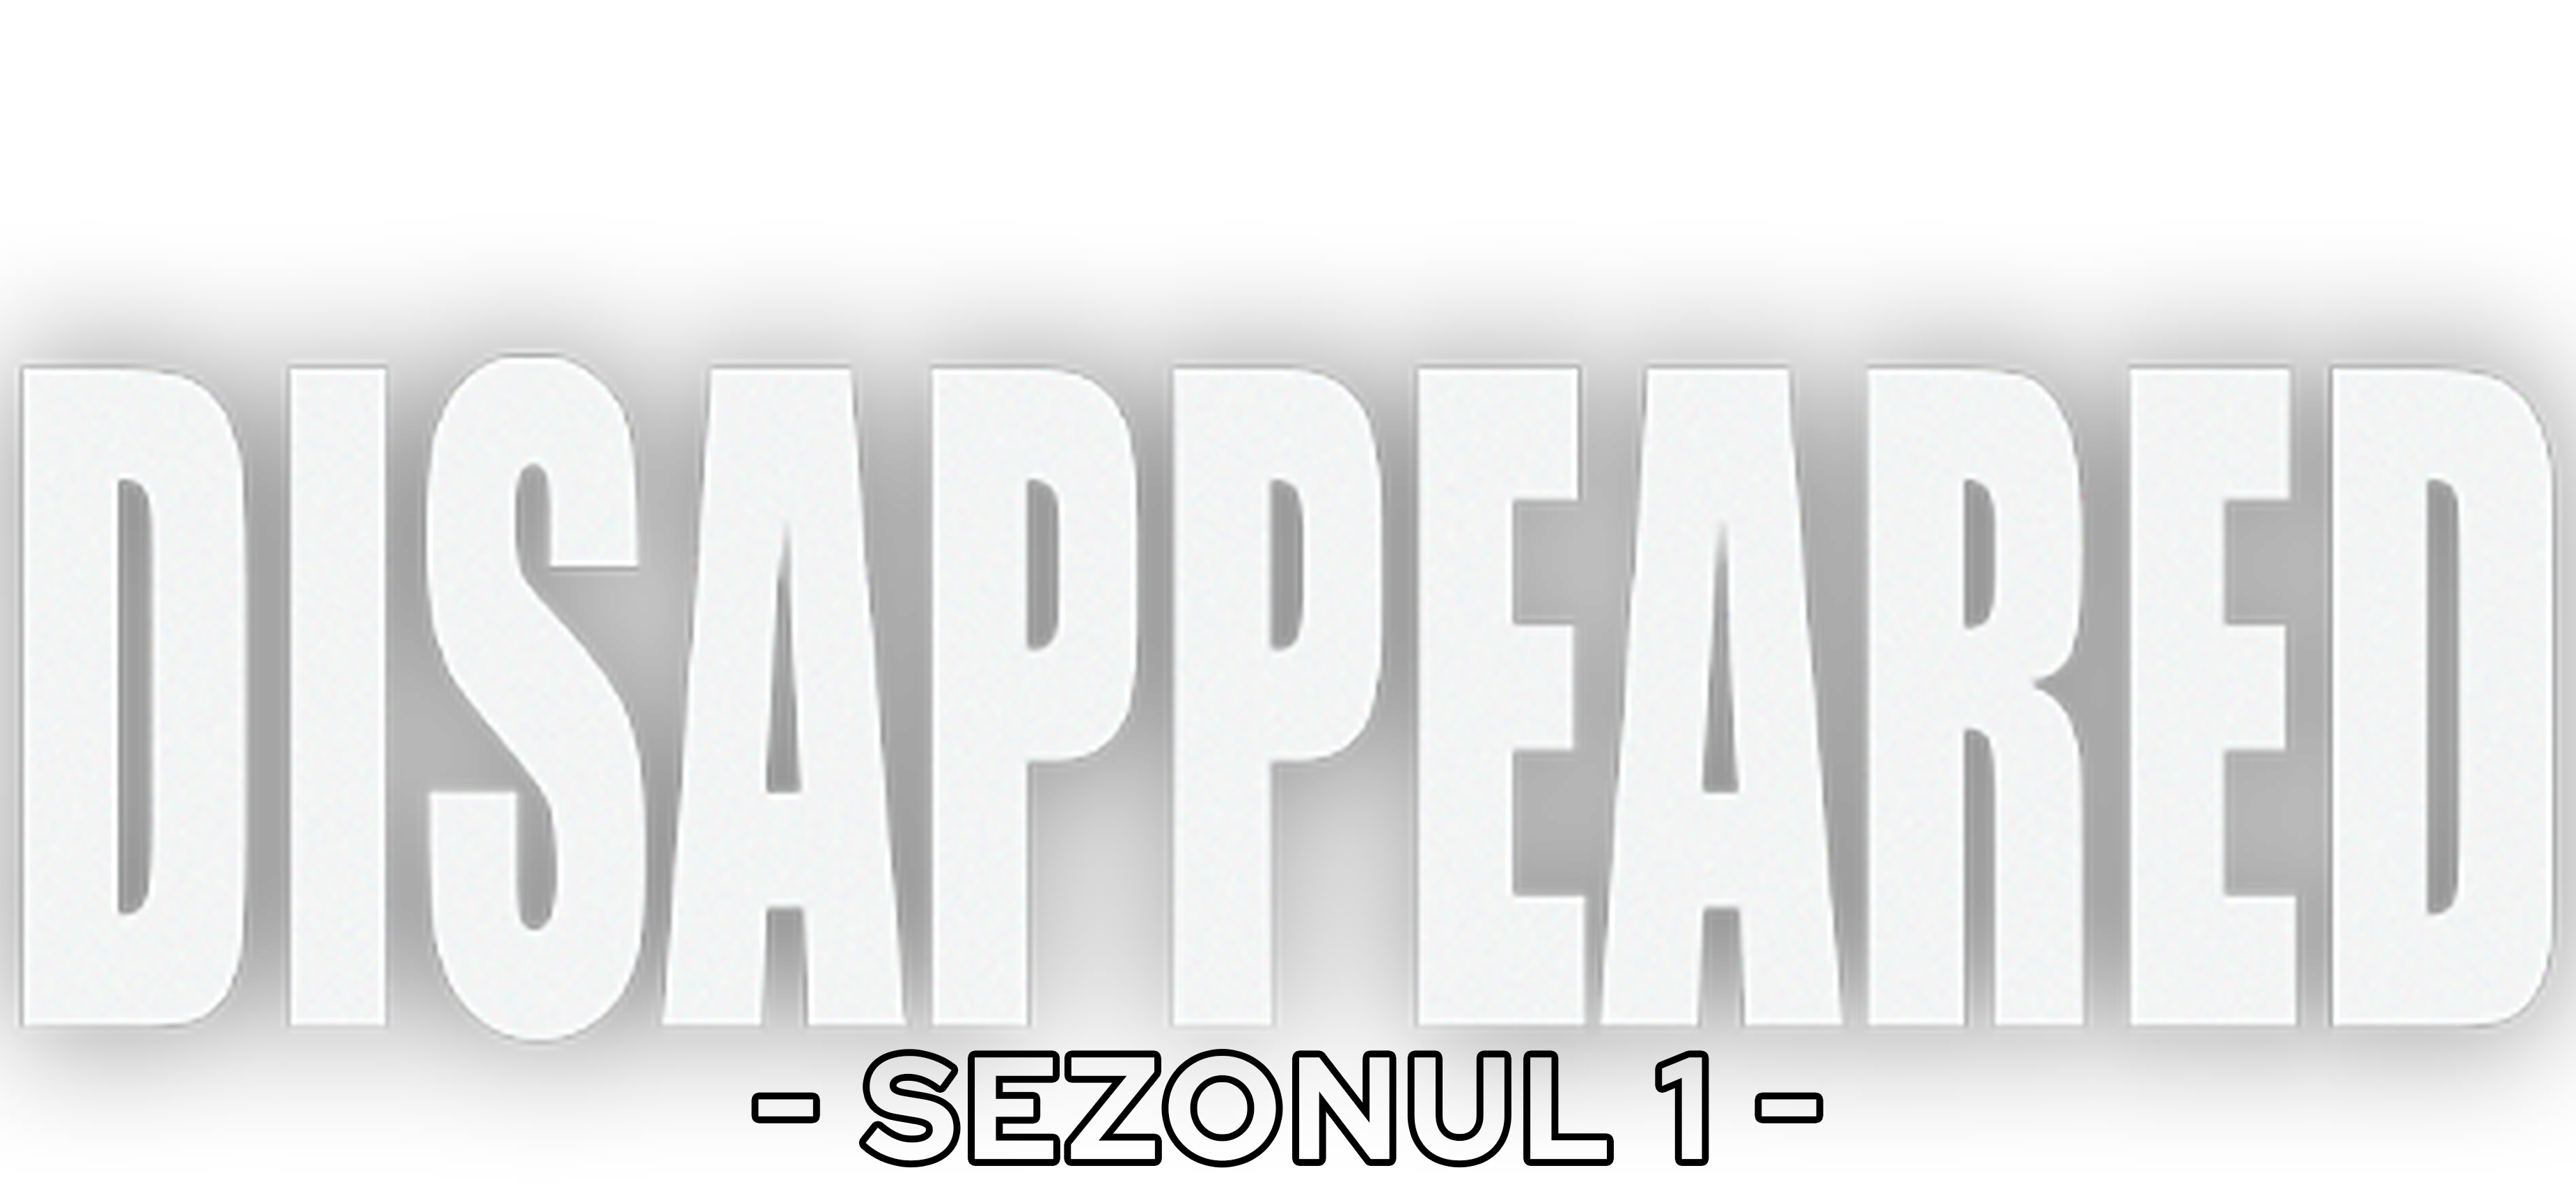 Disappeared	| Sezonul 1